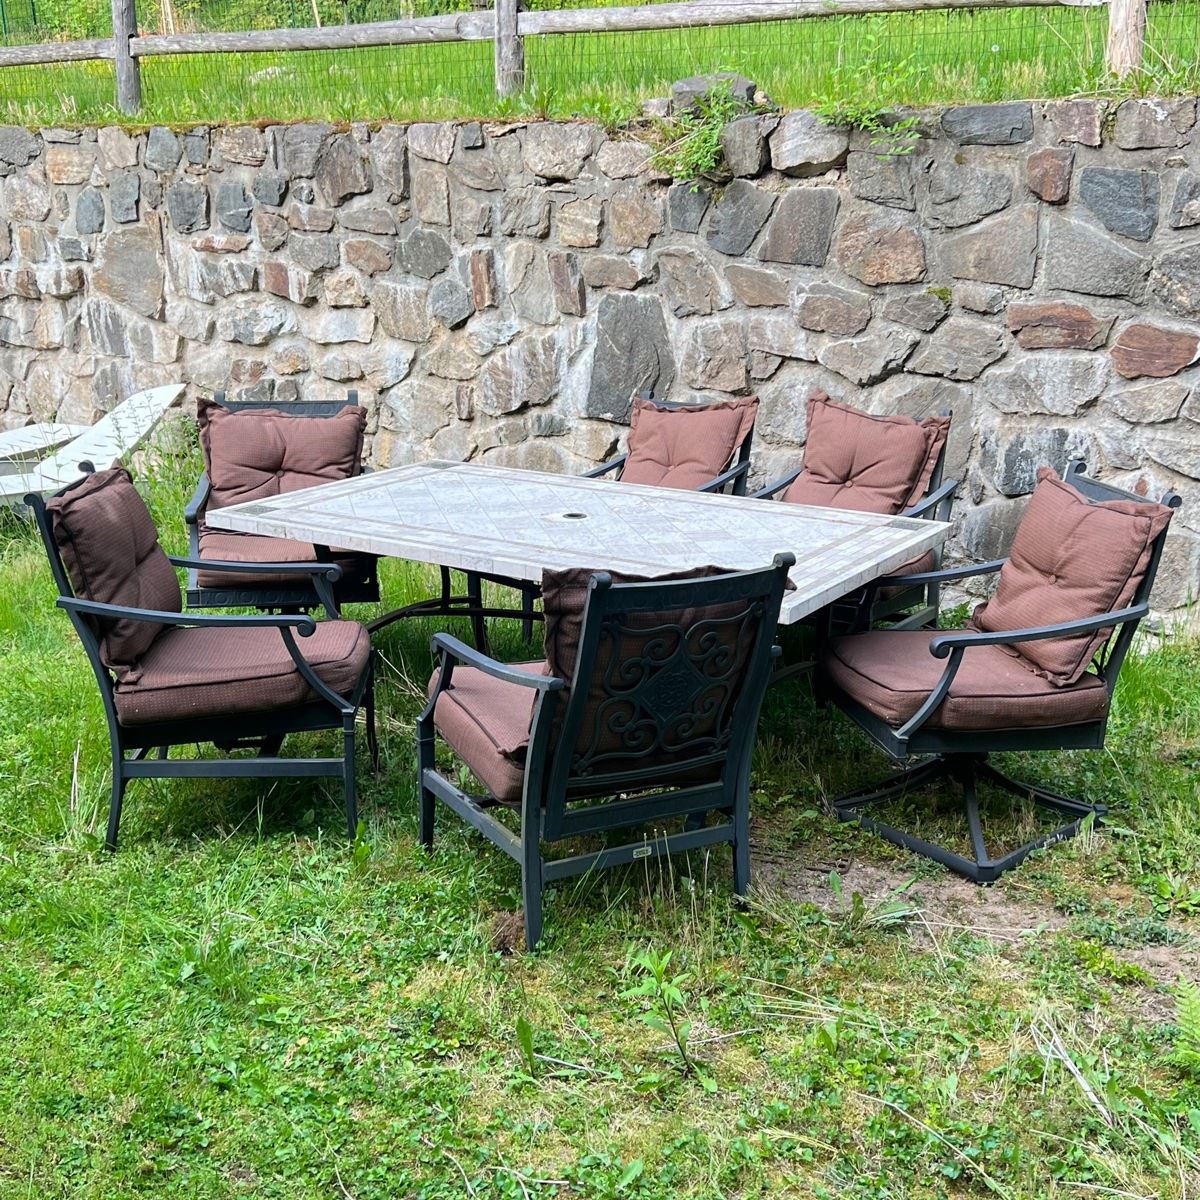 (7PC) PATIO TABLE & CHAIRS | Outdoor dining and lounge suite by Martha Stewart, black aluminum arm chairs with spring seats, cushions, and a white stone tile-top table. - l. 74 x w. 42 x h. 26 in